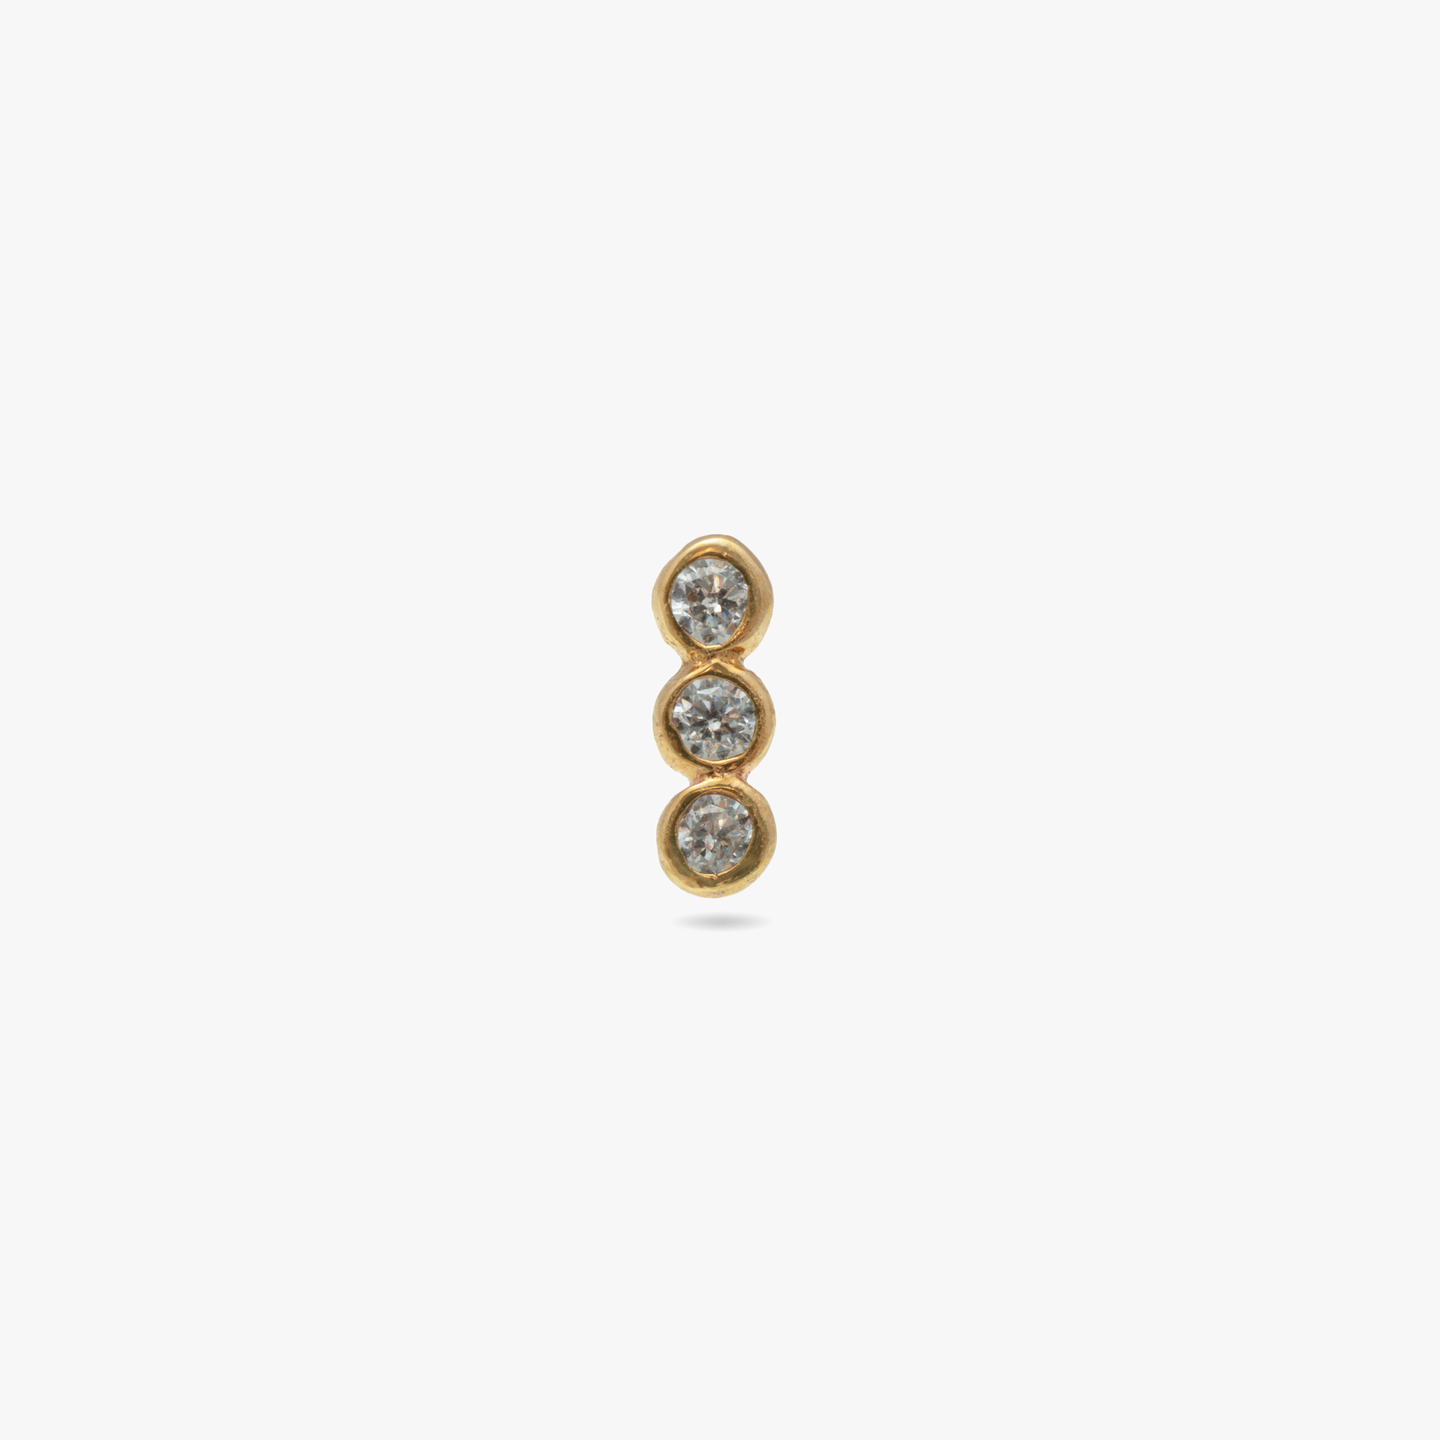 This is a 14k gold bar stud with 3 bezel CZ's color:null|gold/clear